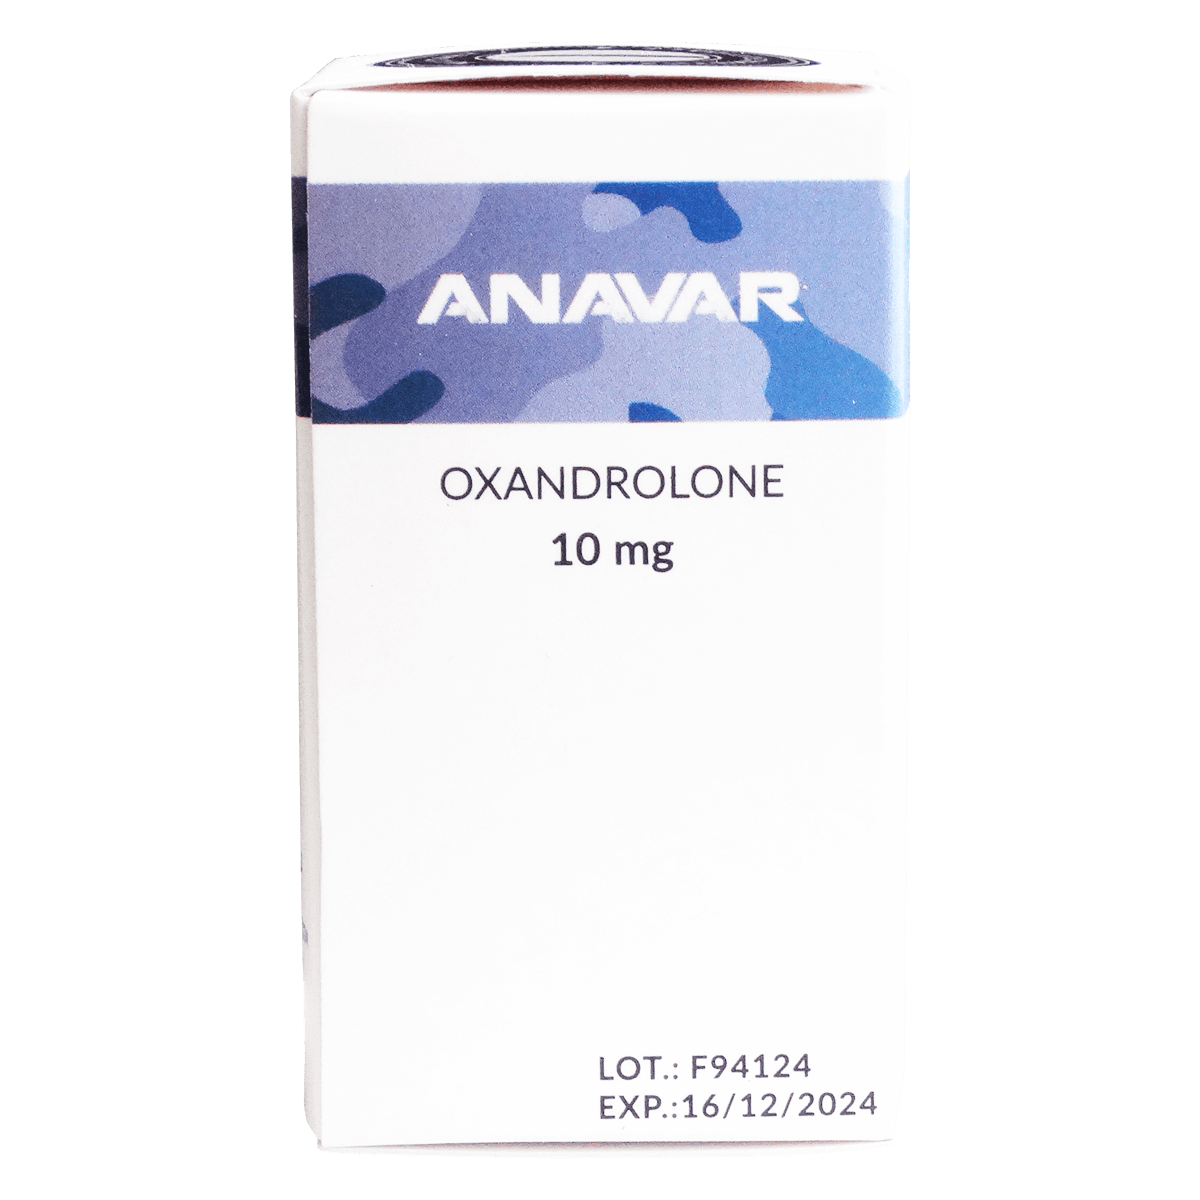 Military_Pharma_Anavar_Oral_Anabolic_Steroid_Androgenic_Fat_Clean_Oxandrolone_oral_Tablets_Lean_muscle_mass_Strength_xsf_group_muscle-hunter